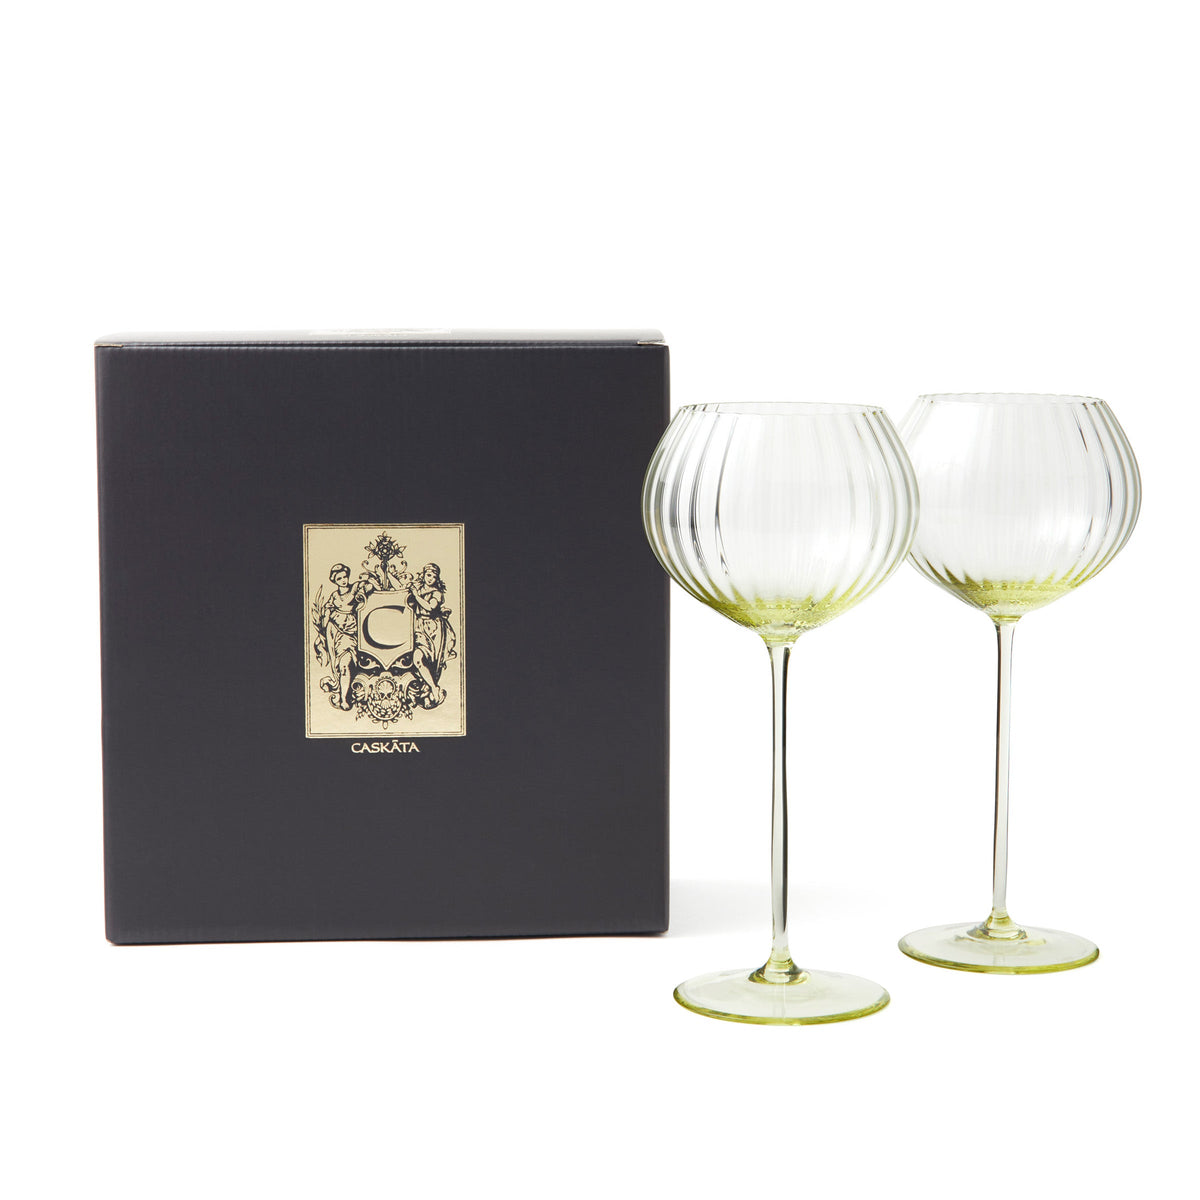 Quinn citrine yellow mouth-blown crystal red wine glasses from Caskata.